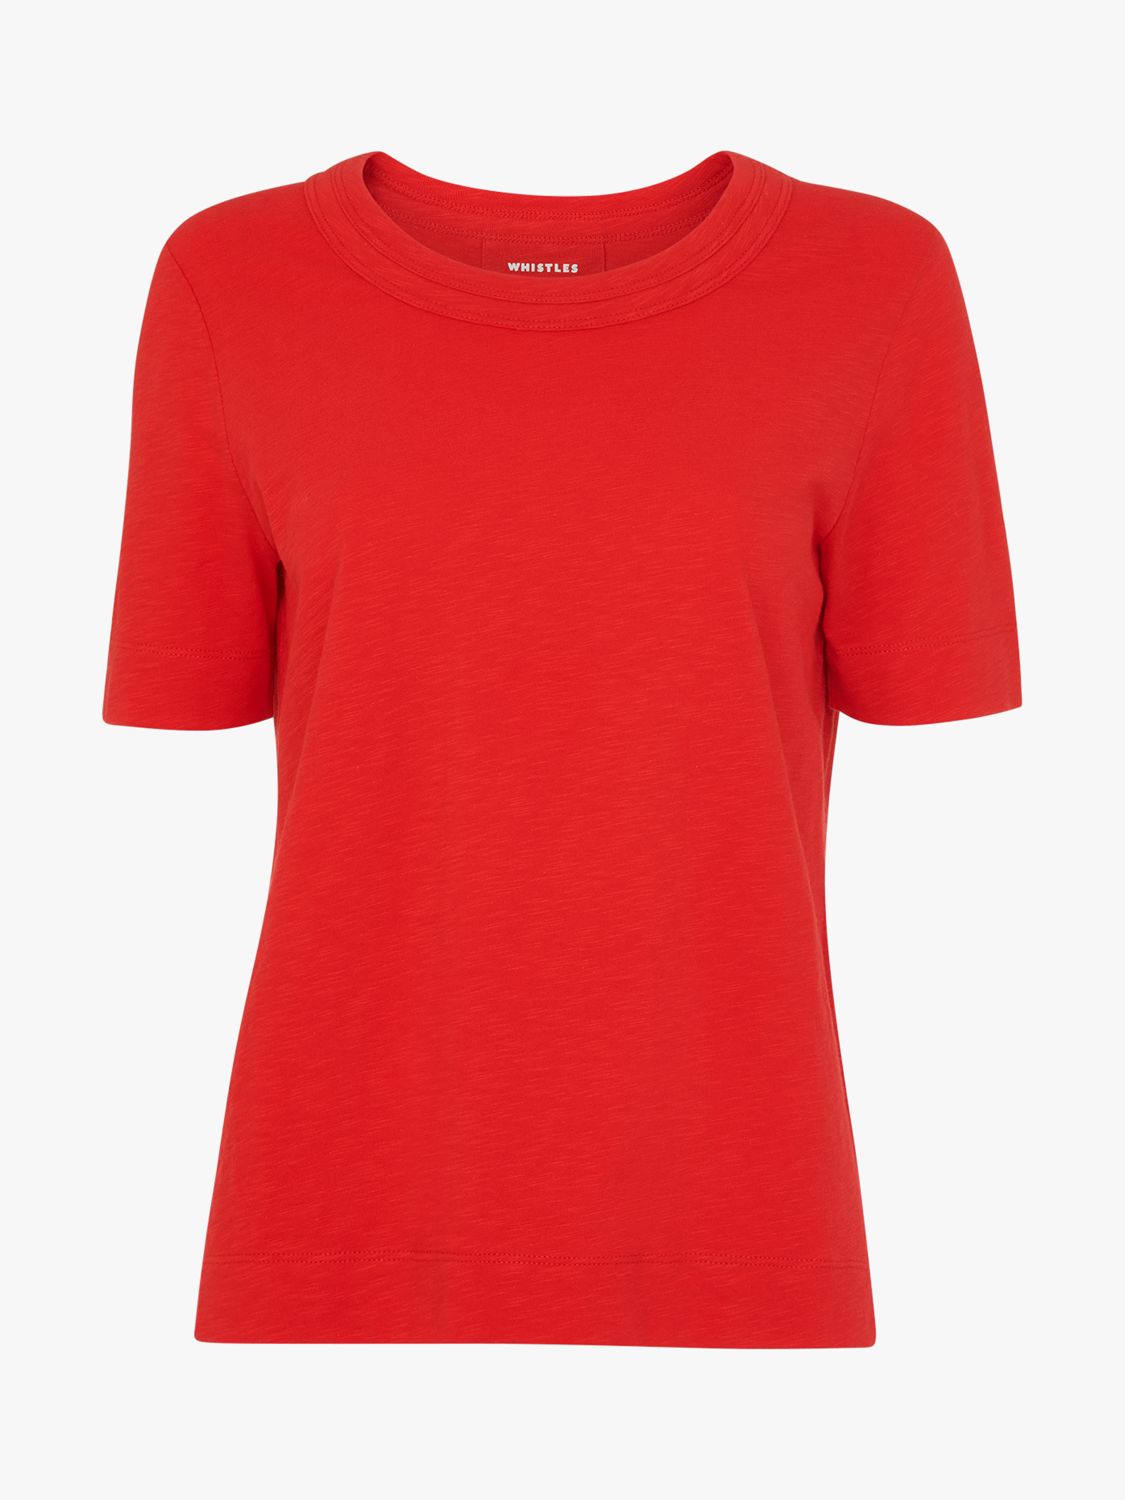 Whistles Rosa Double Trim Cotton T-Shirt, Red at John Lewis & Partners